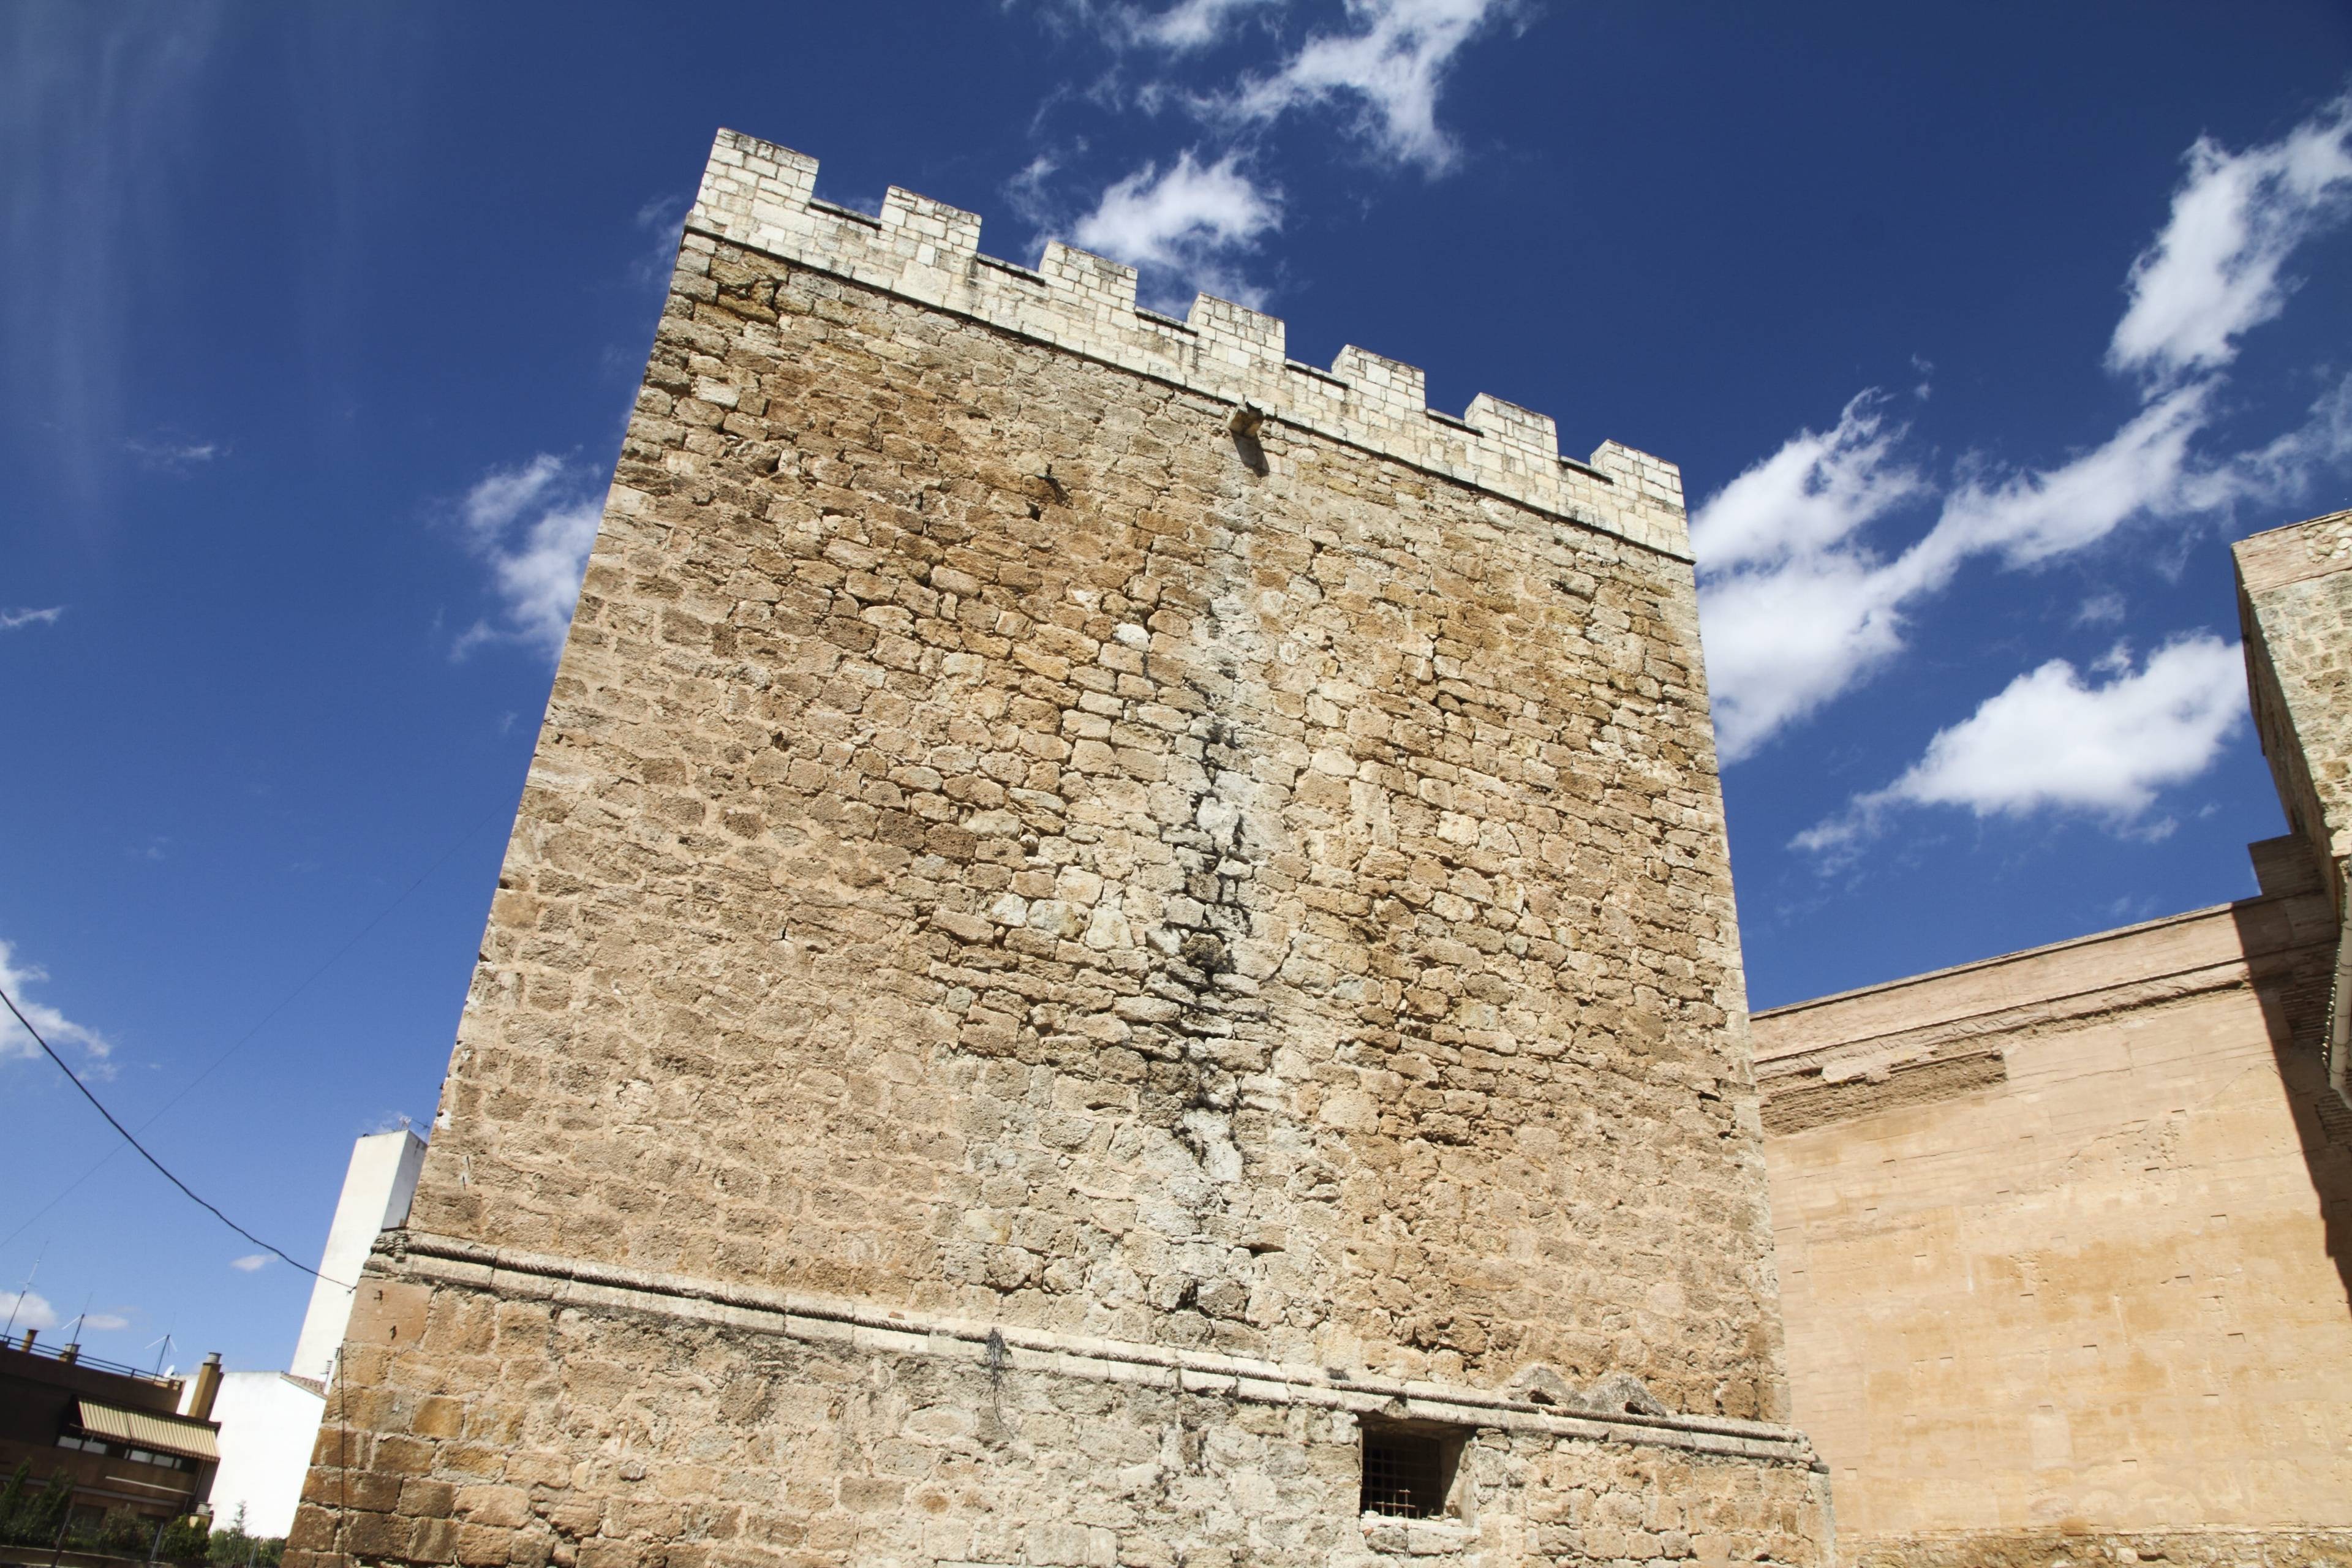 Requena Fortress